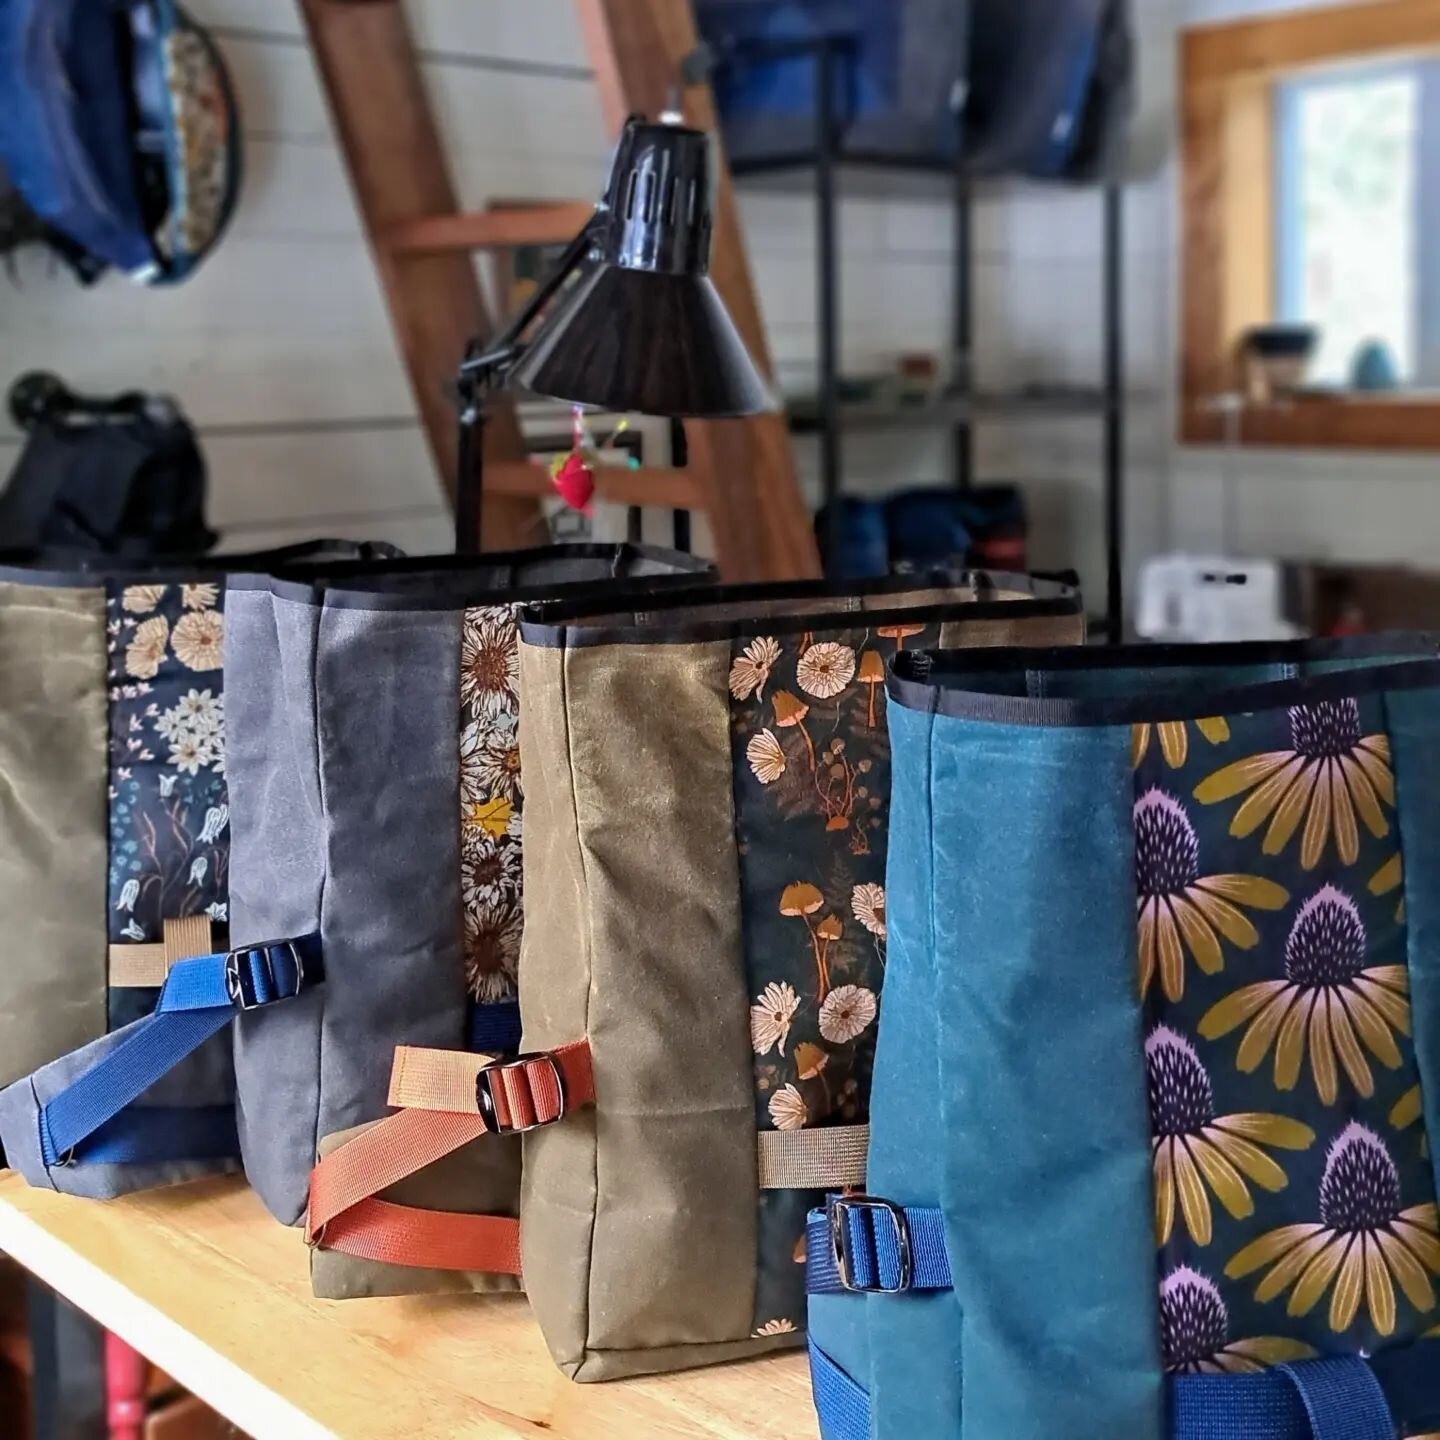 Hip/Handlebar Roll Top Packs ---&gt; All sewn on a human powered treadle sewing machine.
.
Available in the shop, link in bio.
.
.
.
#rolltopbag #bikebag #handlebarbag #cycling #hiking #bikepacking #gravelbike #handmadegear #offgridliving #sewing #sl